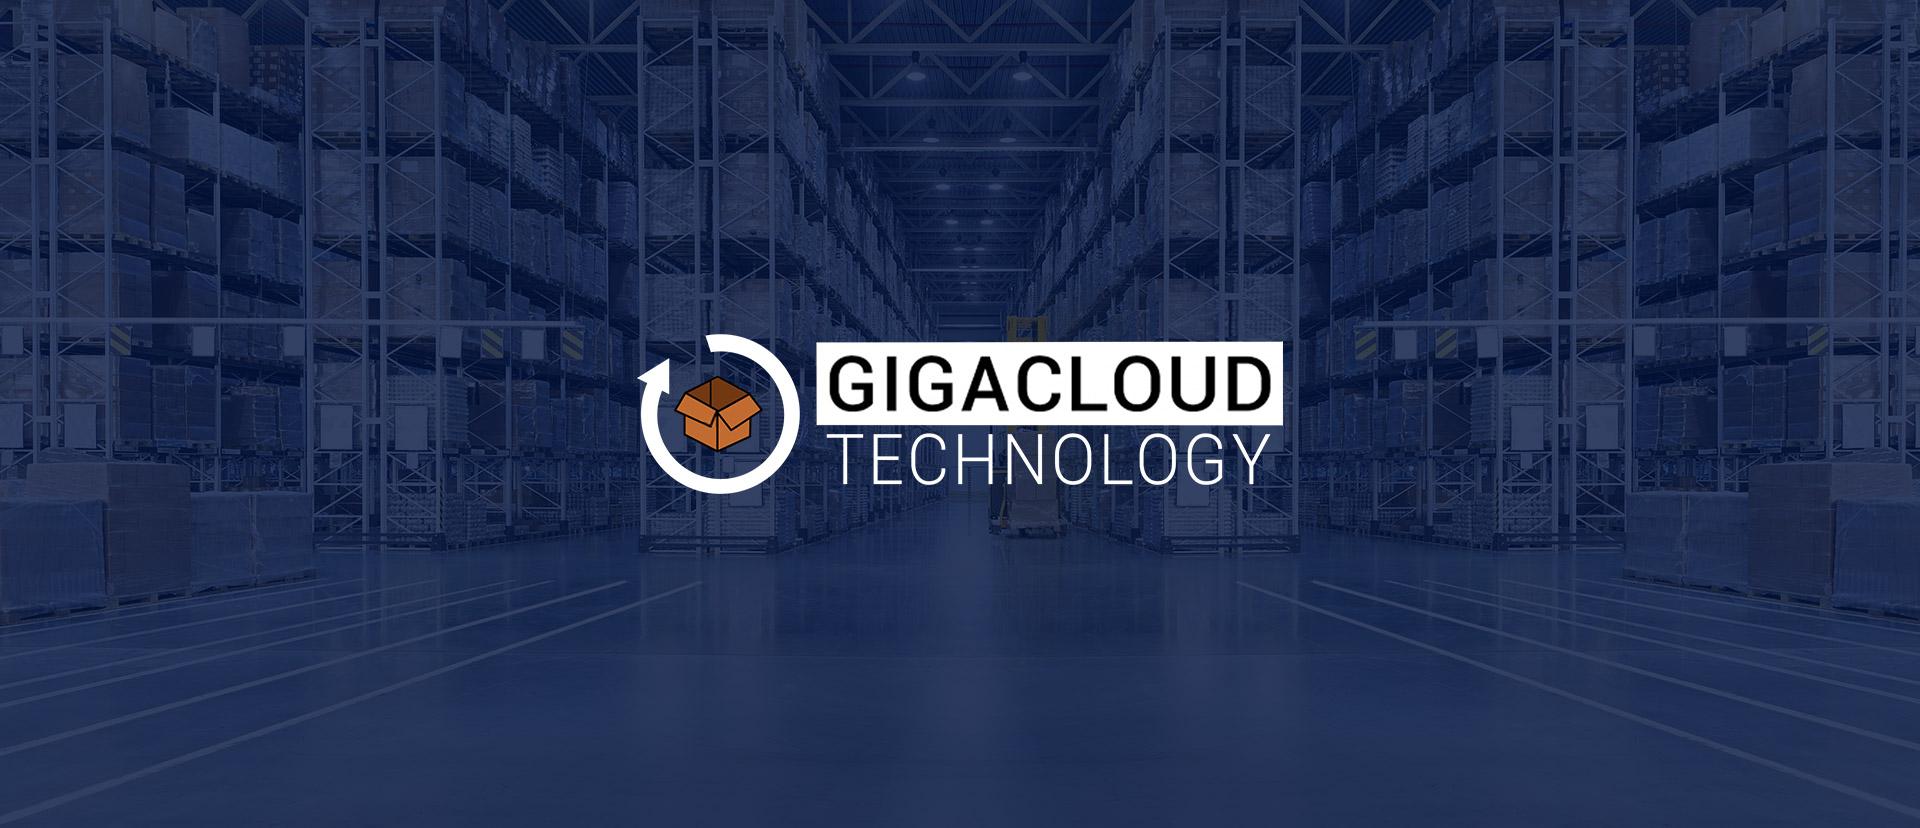 IPO of GigaCloud Technology: A Marketplace For SME